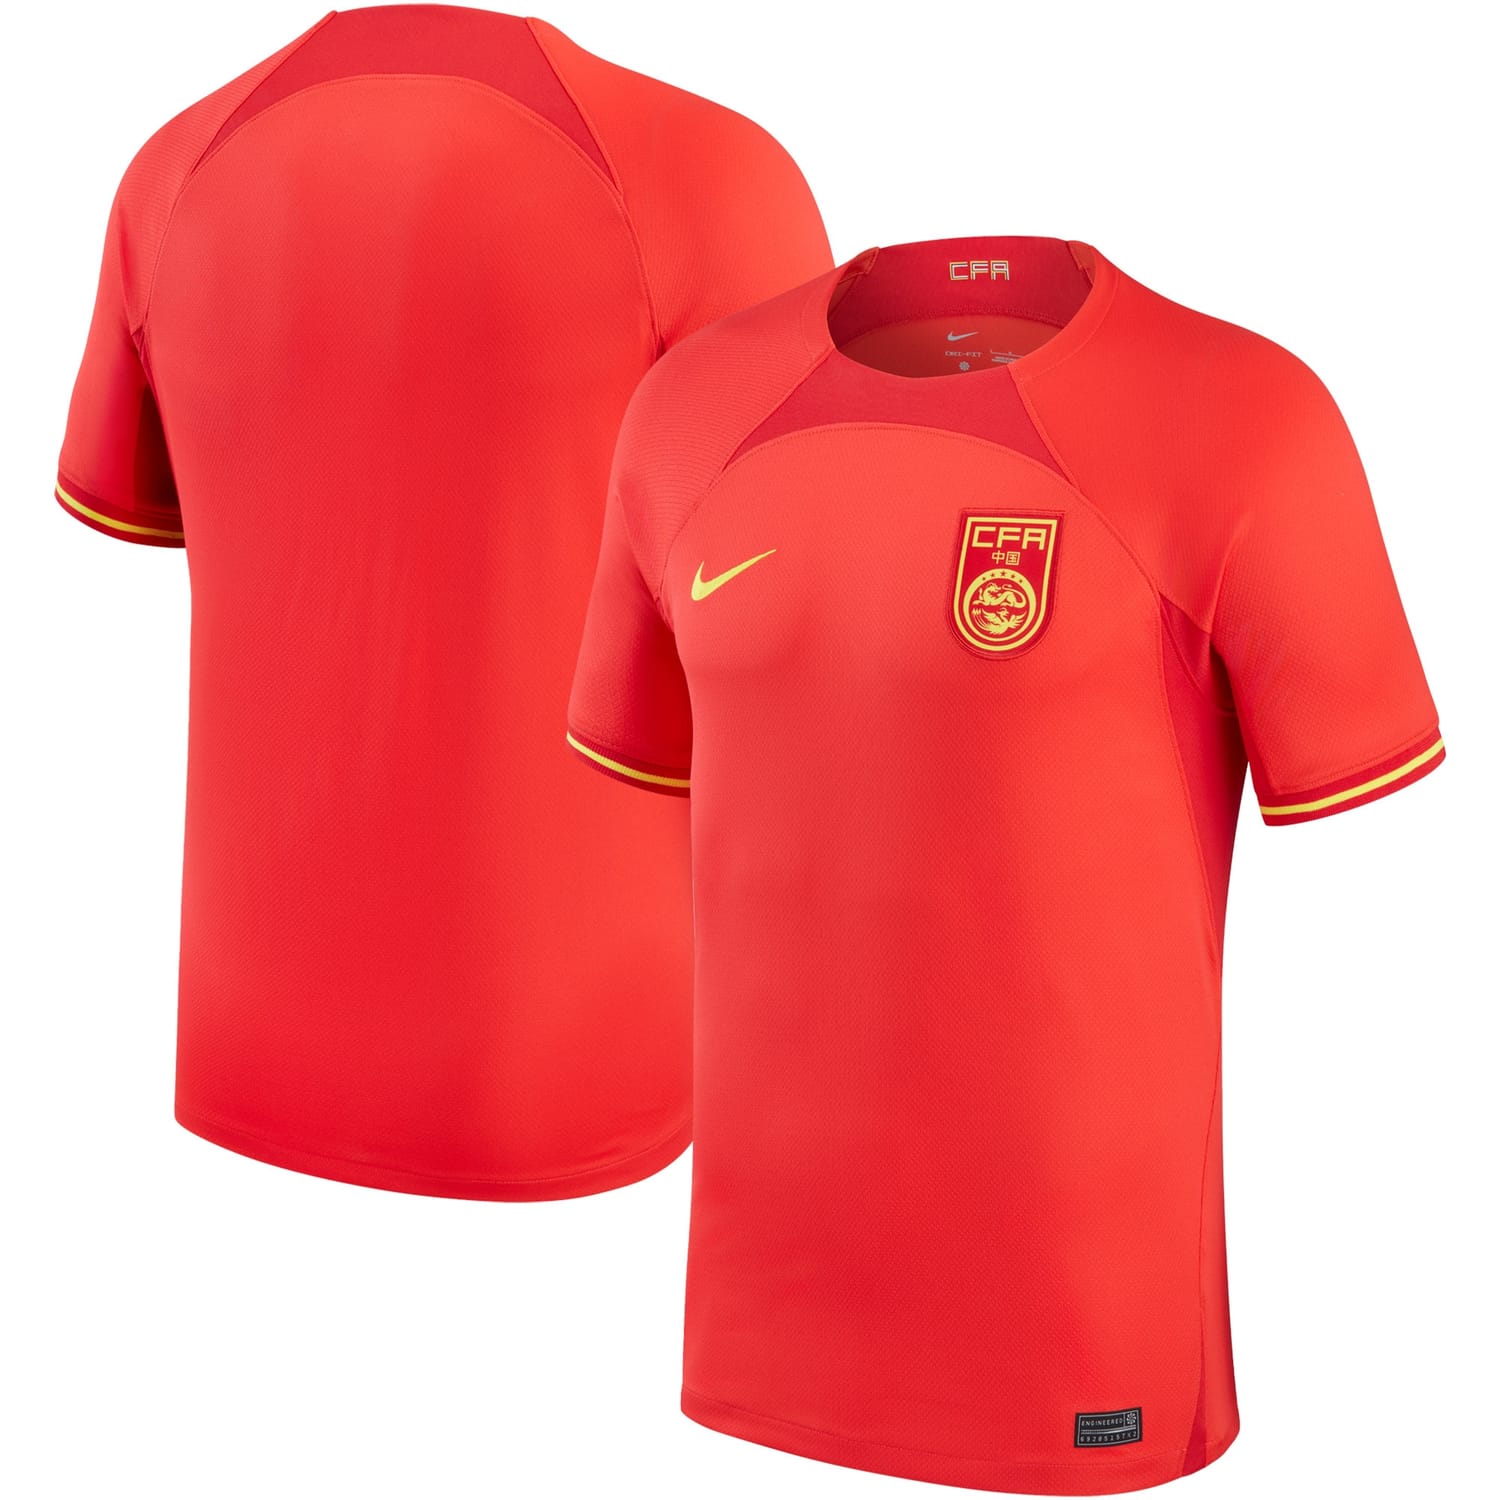 China National Team Home Jersey Shirt Red 2022-23 for Men